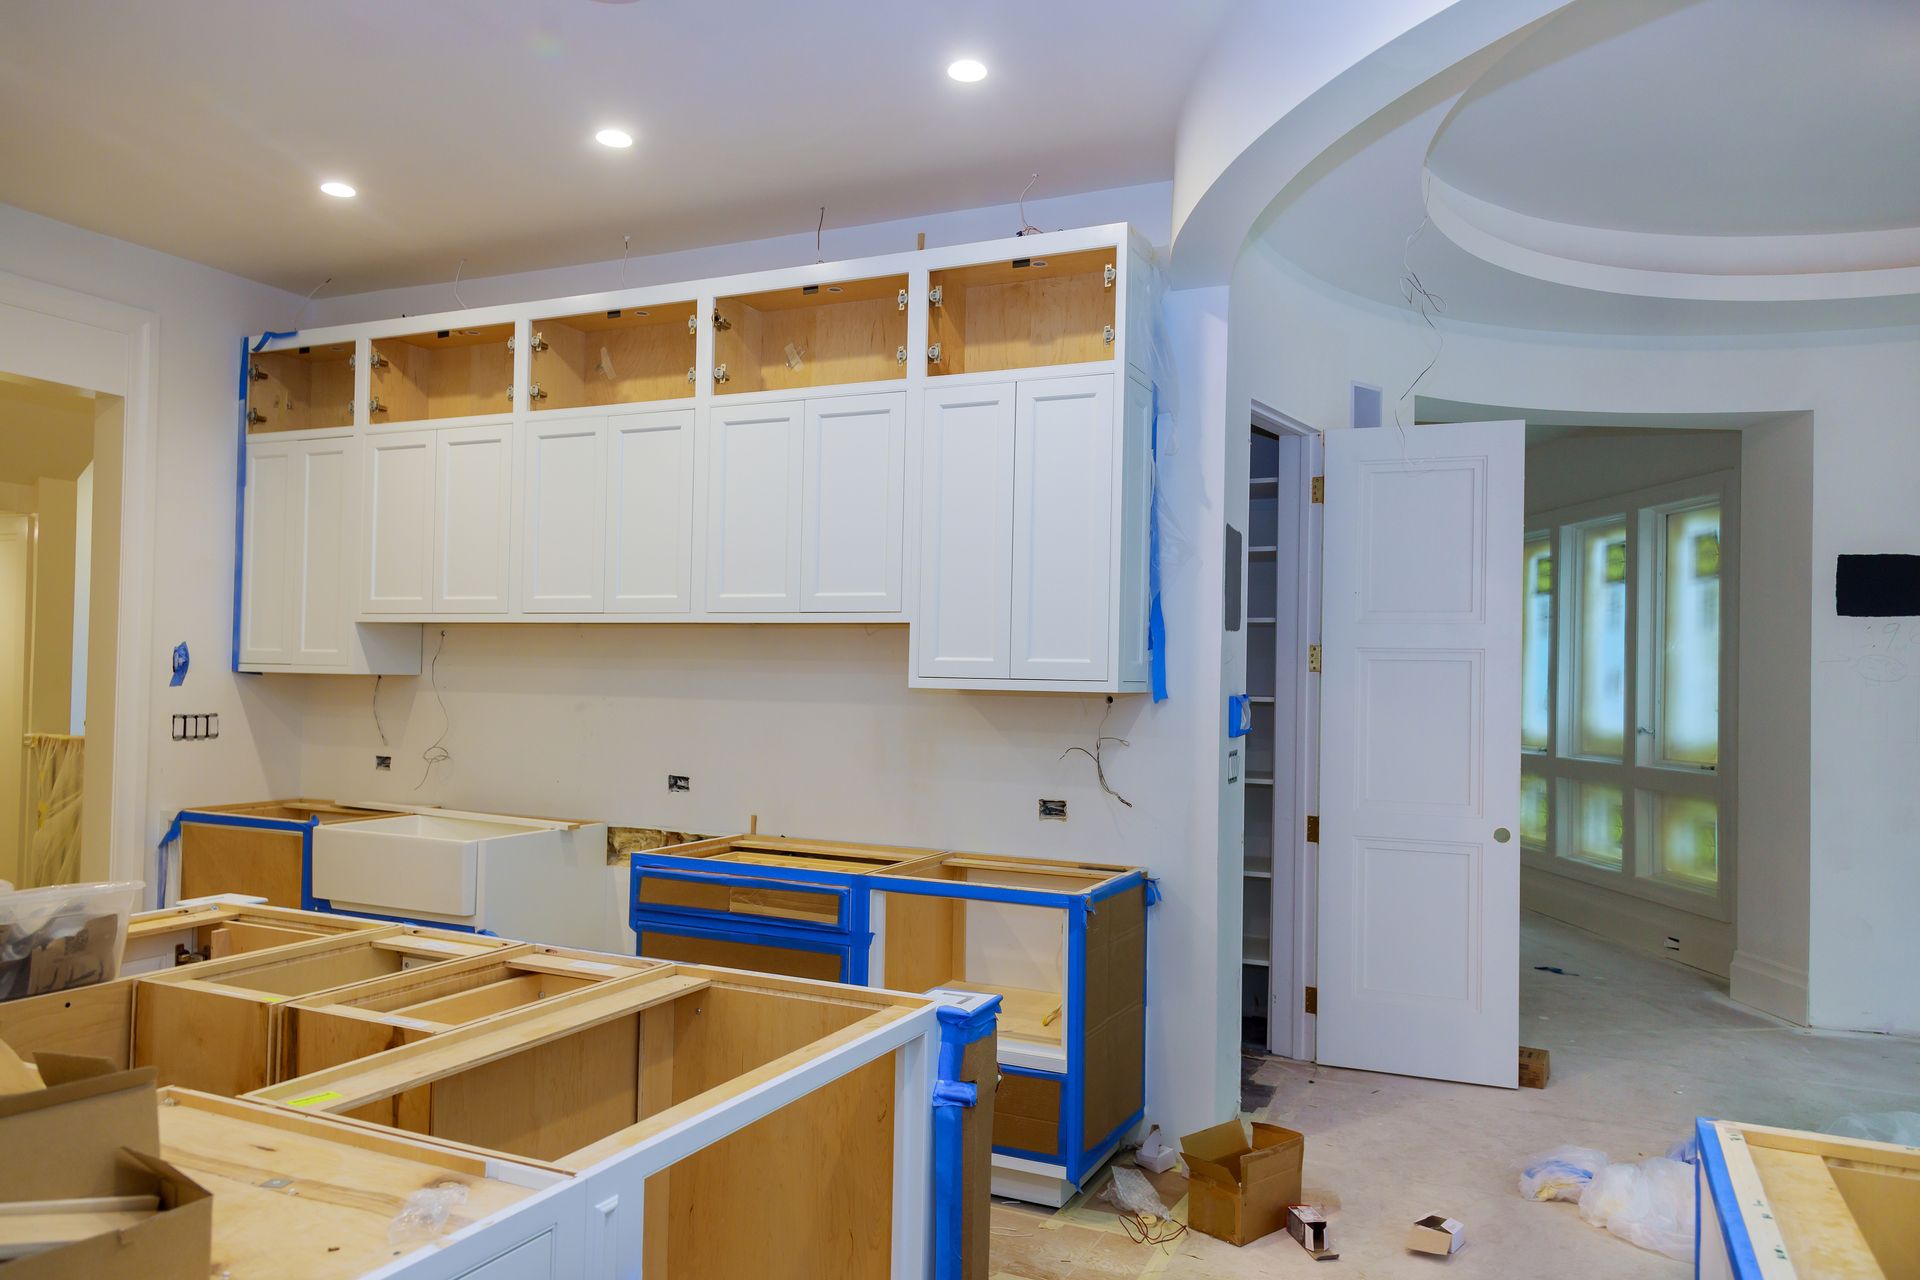 Newly installed white kitchen cabinets in a newly constructed house.